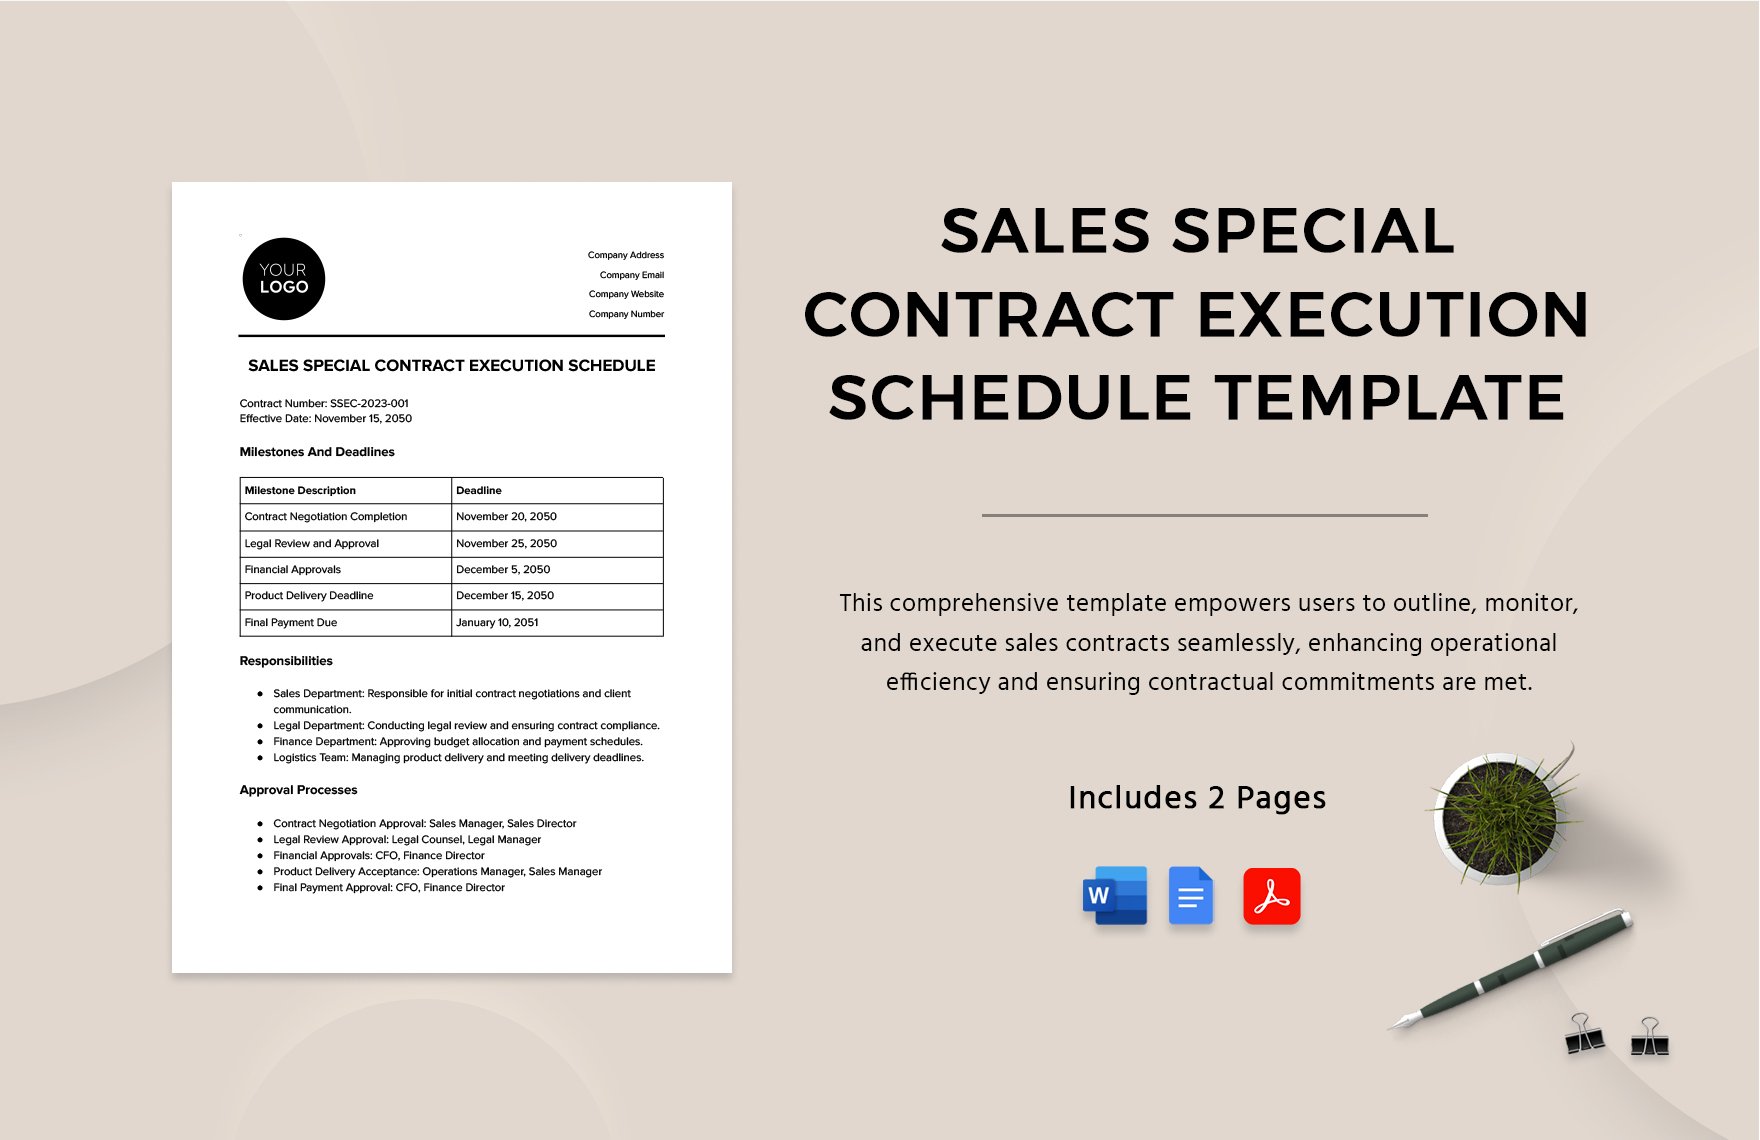 Sales Special Contract Execution Schedule Template in Word, Google Docs, PDF